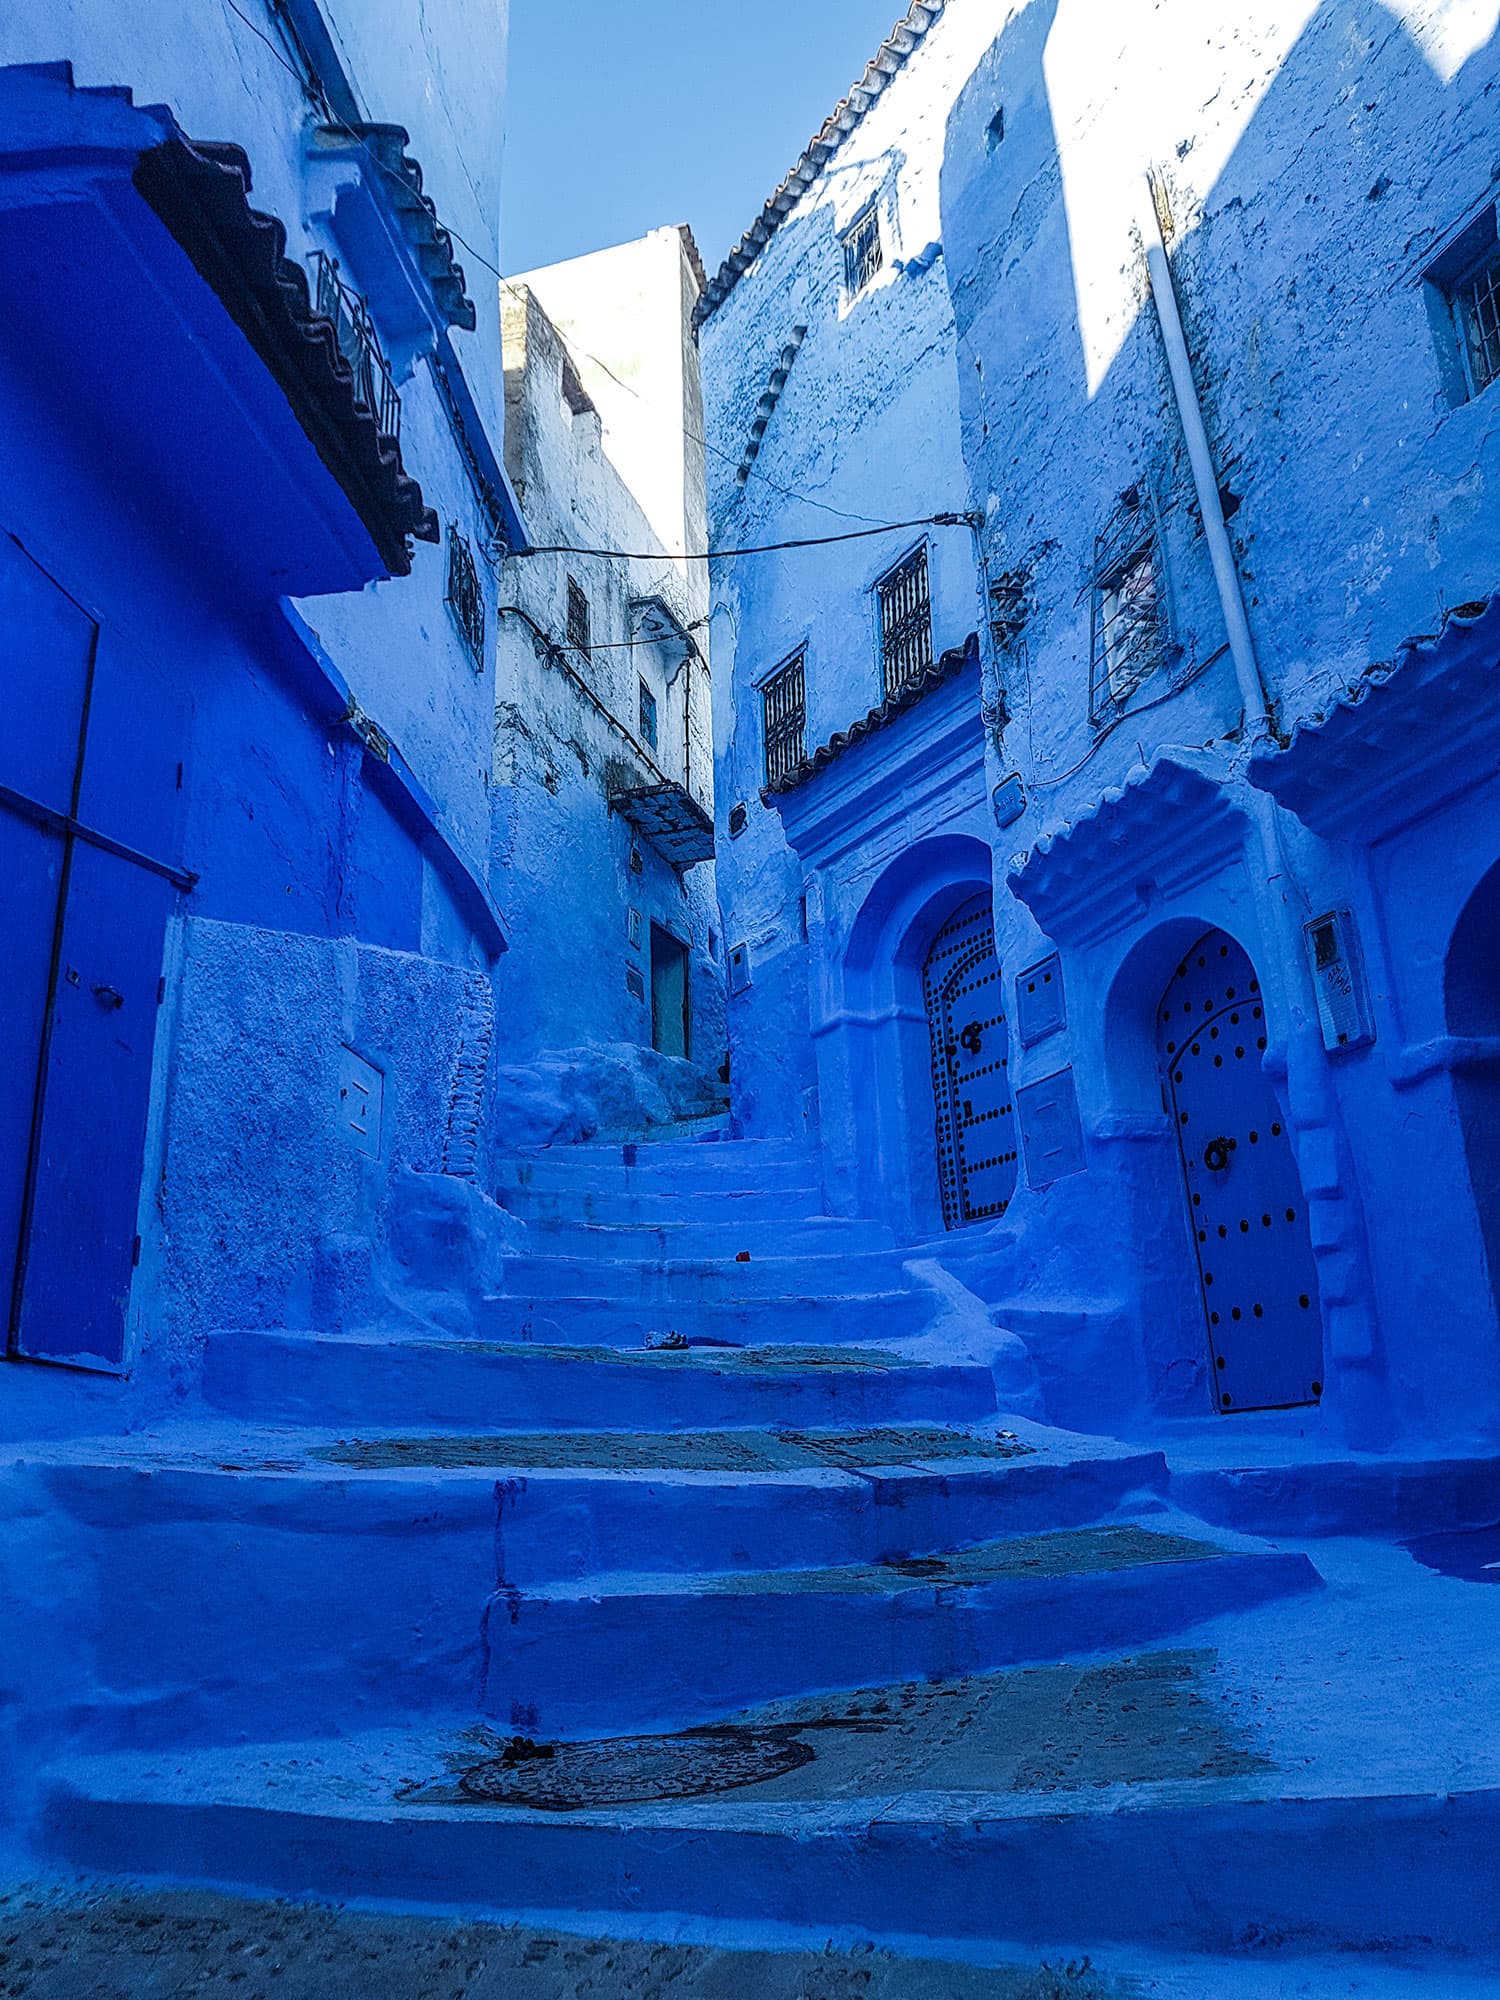 Chefchaouen, the blue city of Morocco